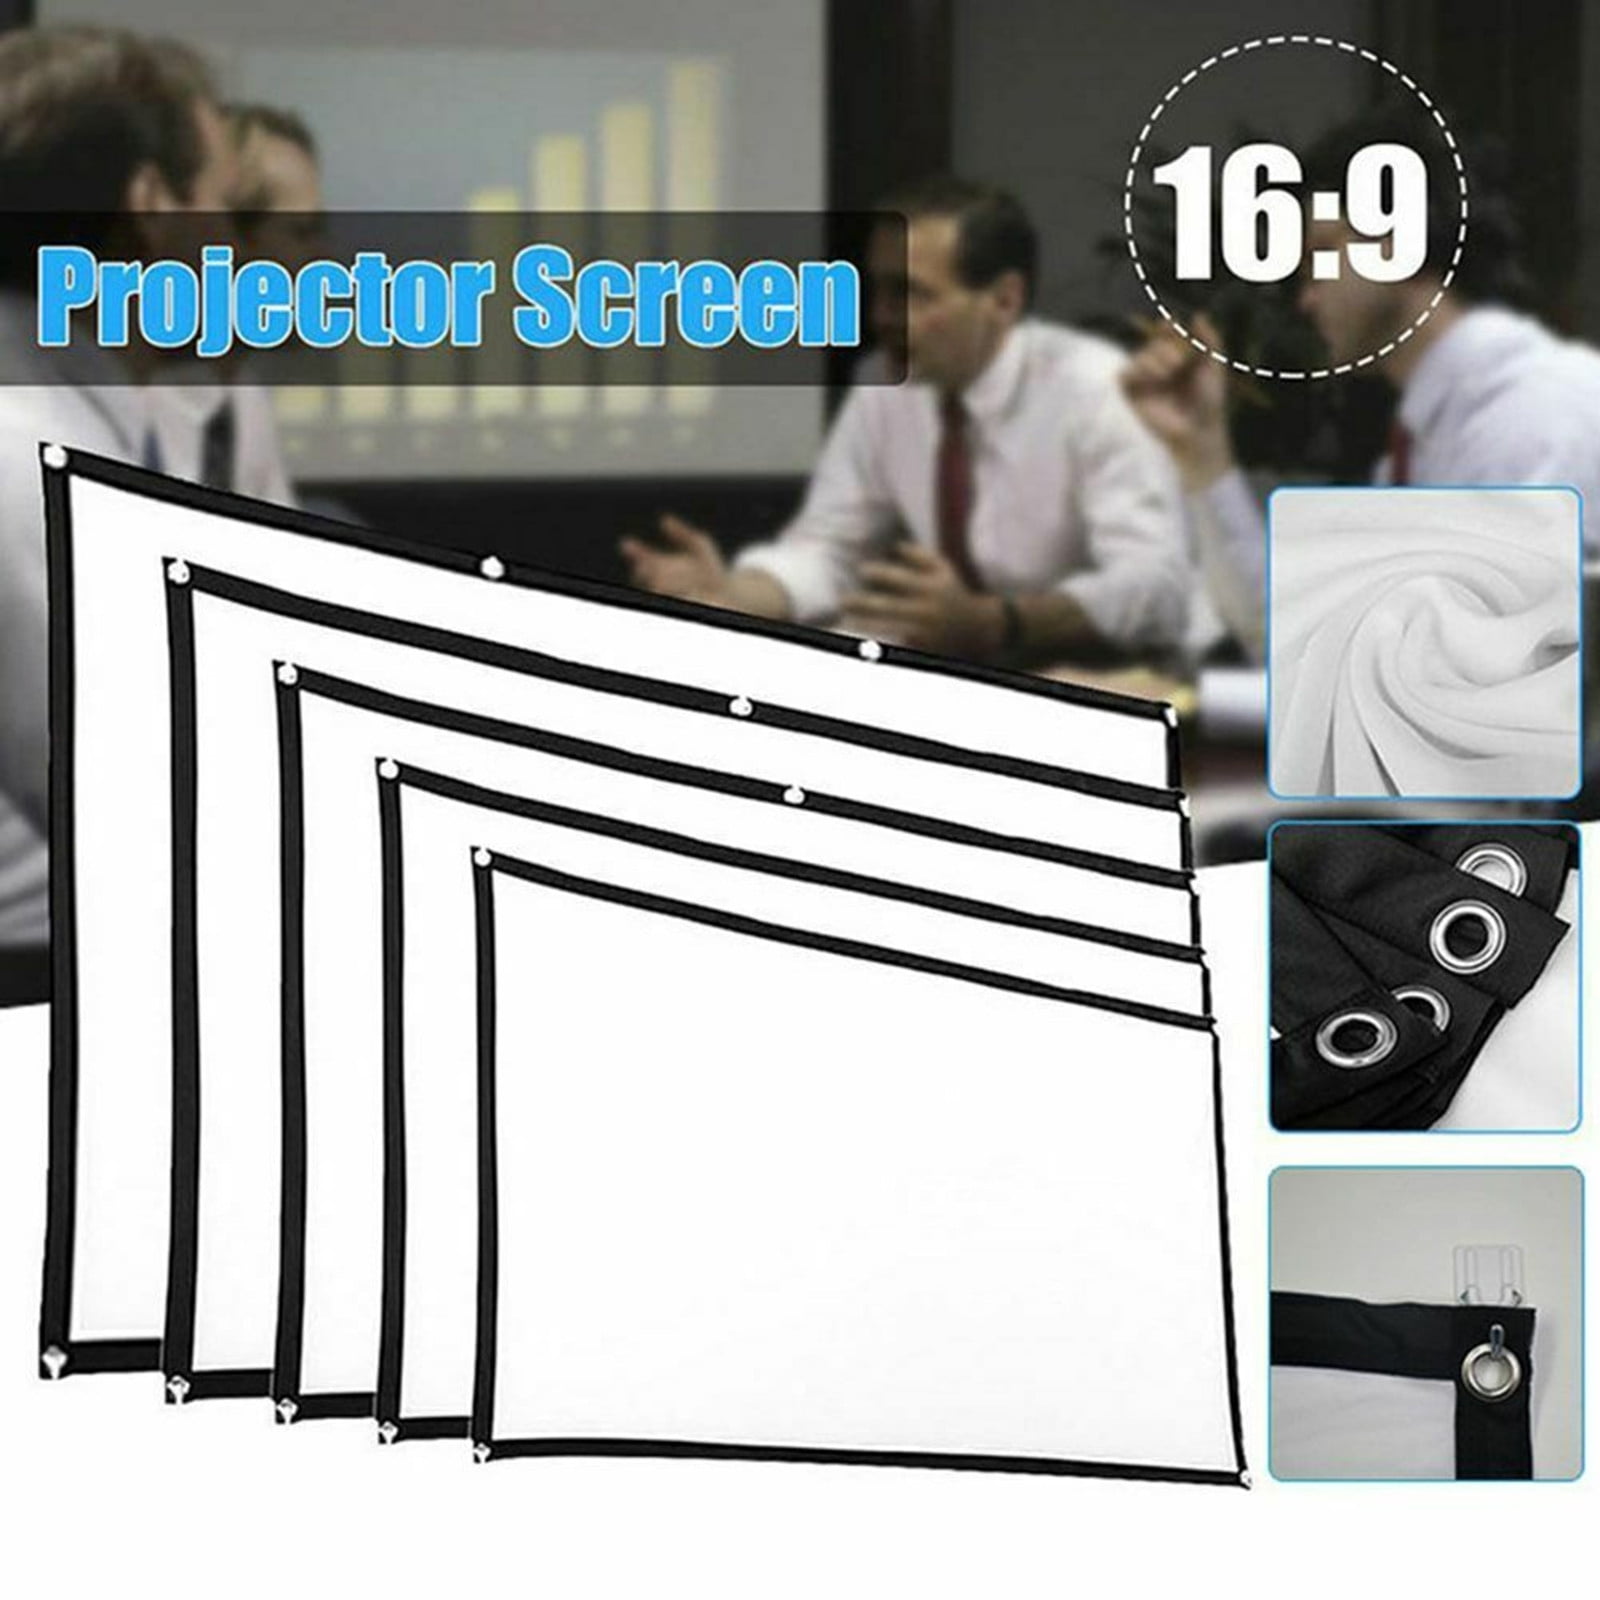 HD Projector Screen 16:9Home Cinema Theater Projection Portable Screen ProjectoR 